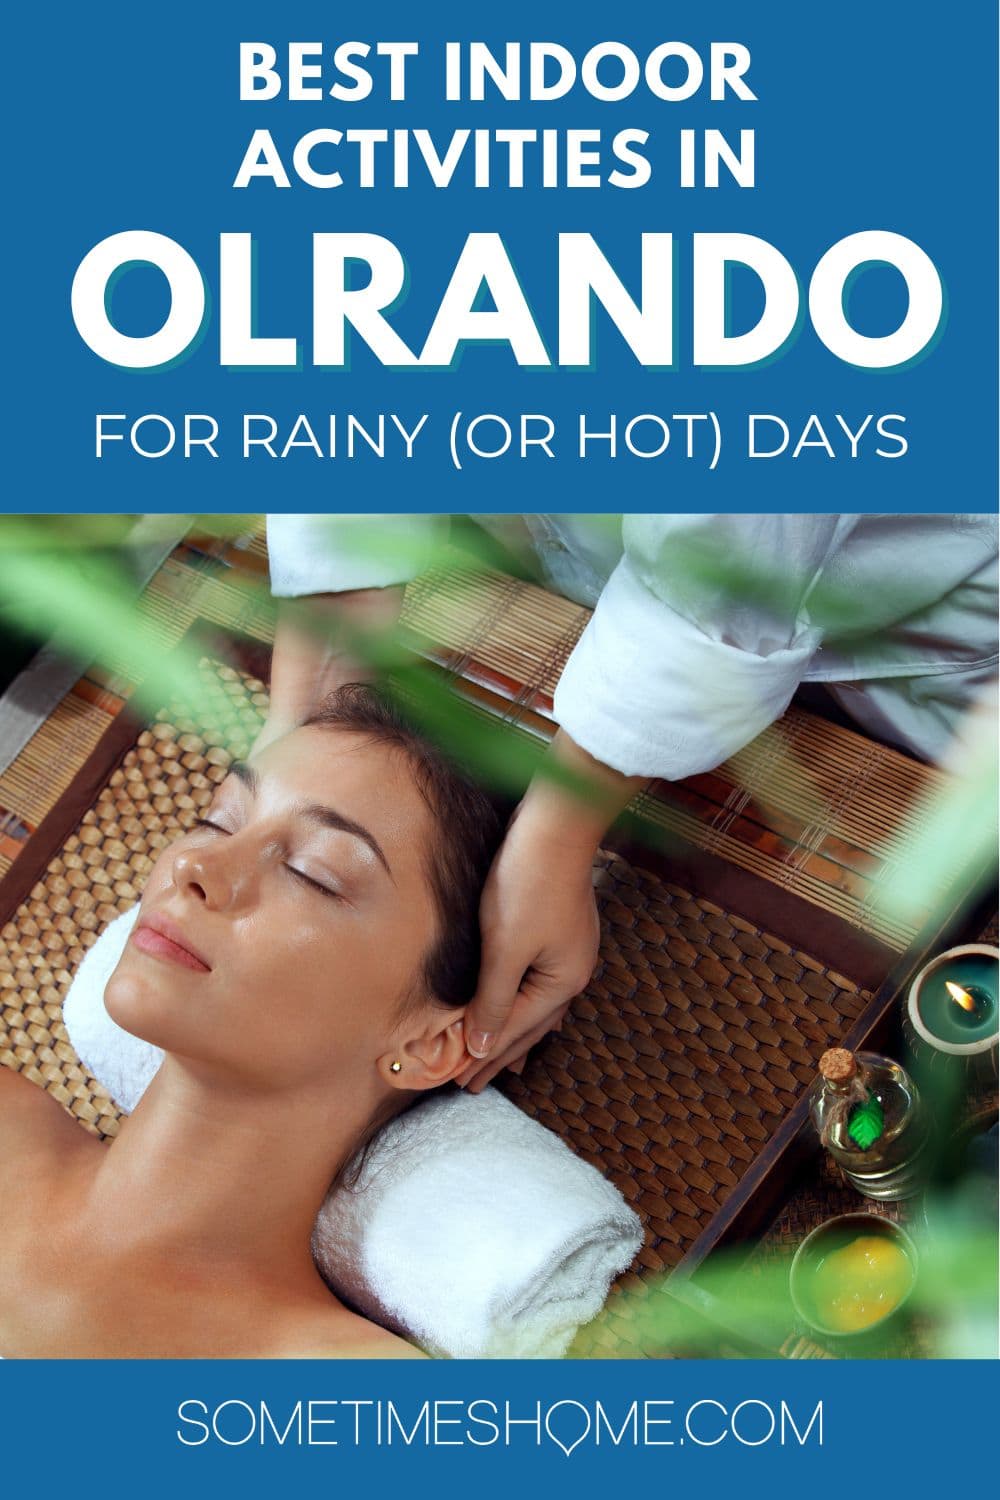 Best indoor activities in Orlando for rainy or hot days with a photo of a woman's head getting massaged at a spa.